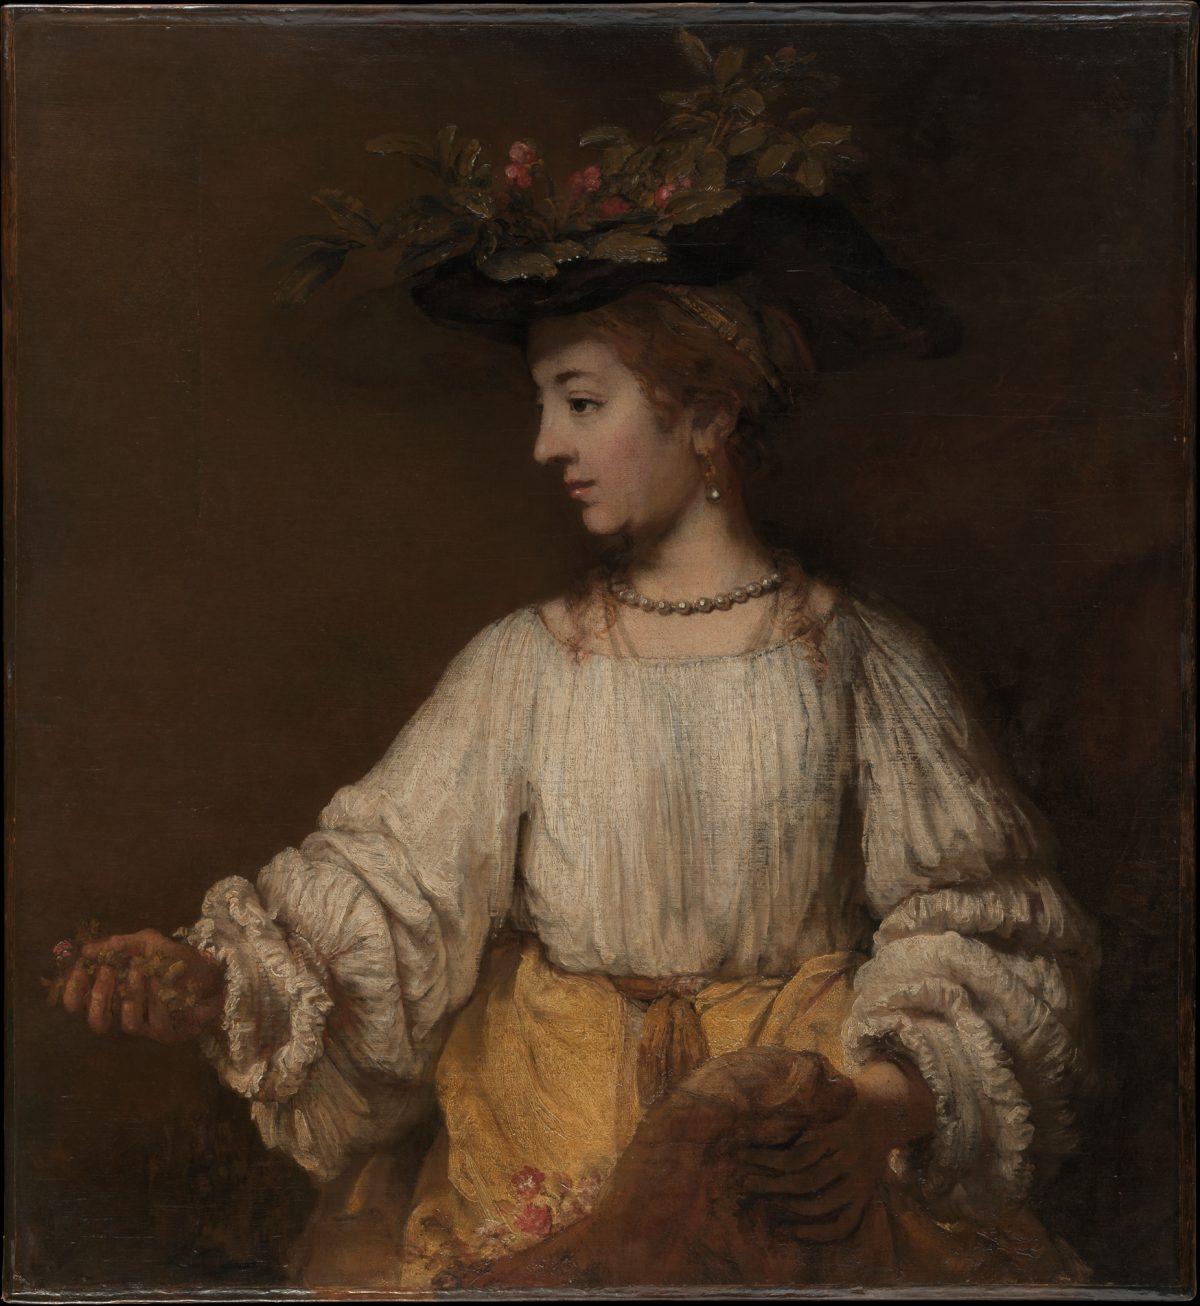 The warmth of this painting captivated me. “Flora,” circa 1654, by Rembrandt. Oil on canvas, 39 3/8 inches by 36 1/8 inches. Gift of Archer M. Huntington, in memory of his father, Collis Potter Huntington, 1926. (The Metropolitan Museum of Art)